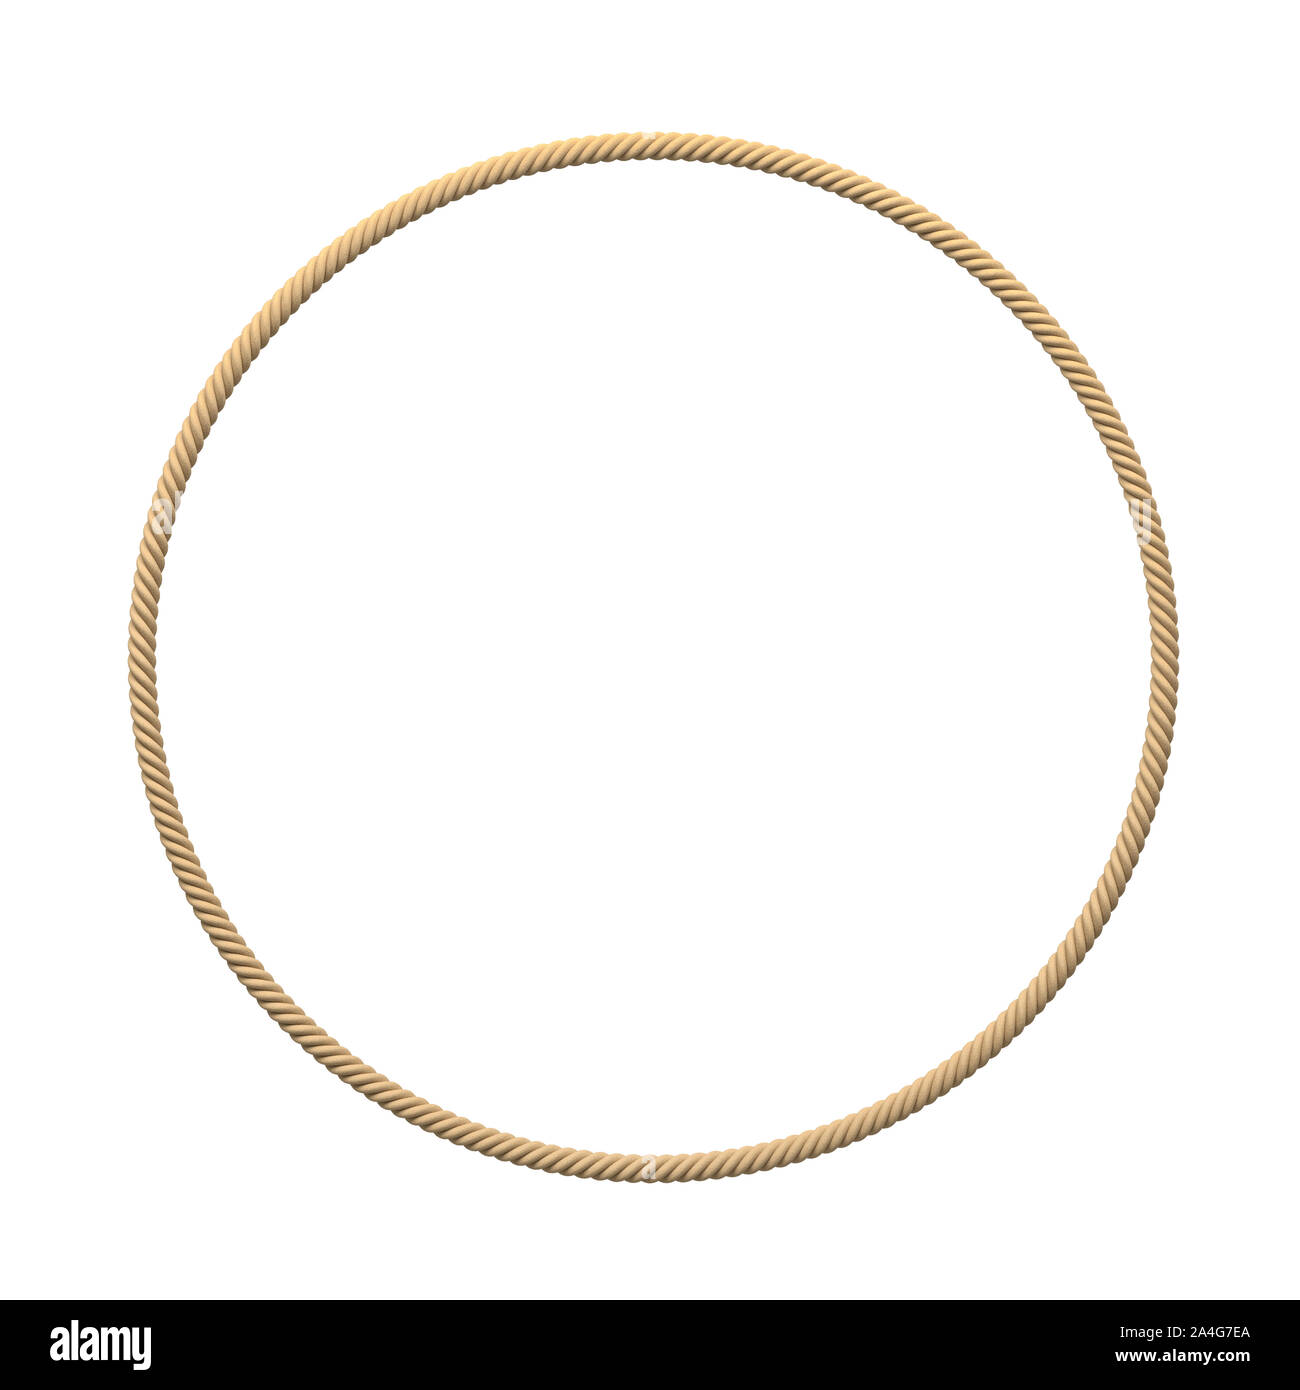 3d rendering of an isolated beige rope making a complete circle on a white  background. Rope circle. Endless cord. Round twine Stock Photo - Alamy